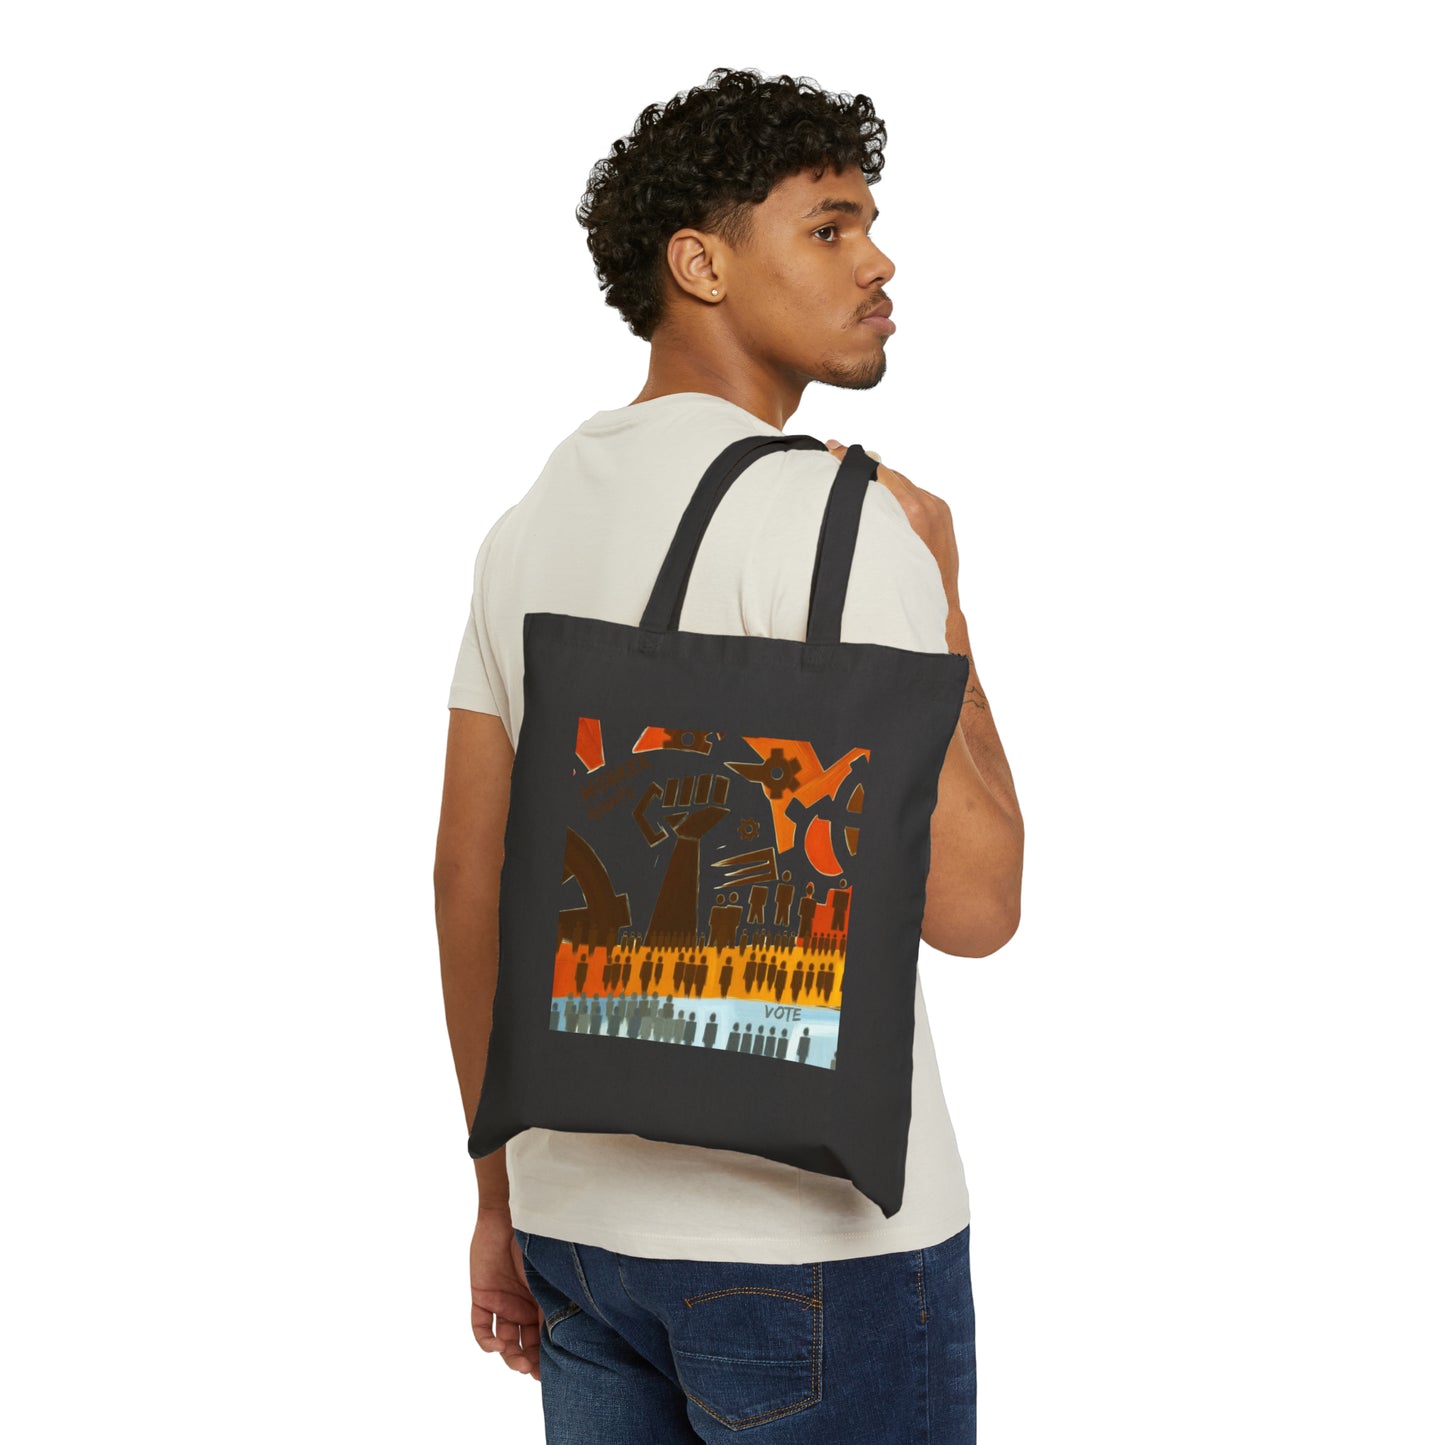 Worker Rights Vote (Canvas Tote Bag)